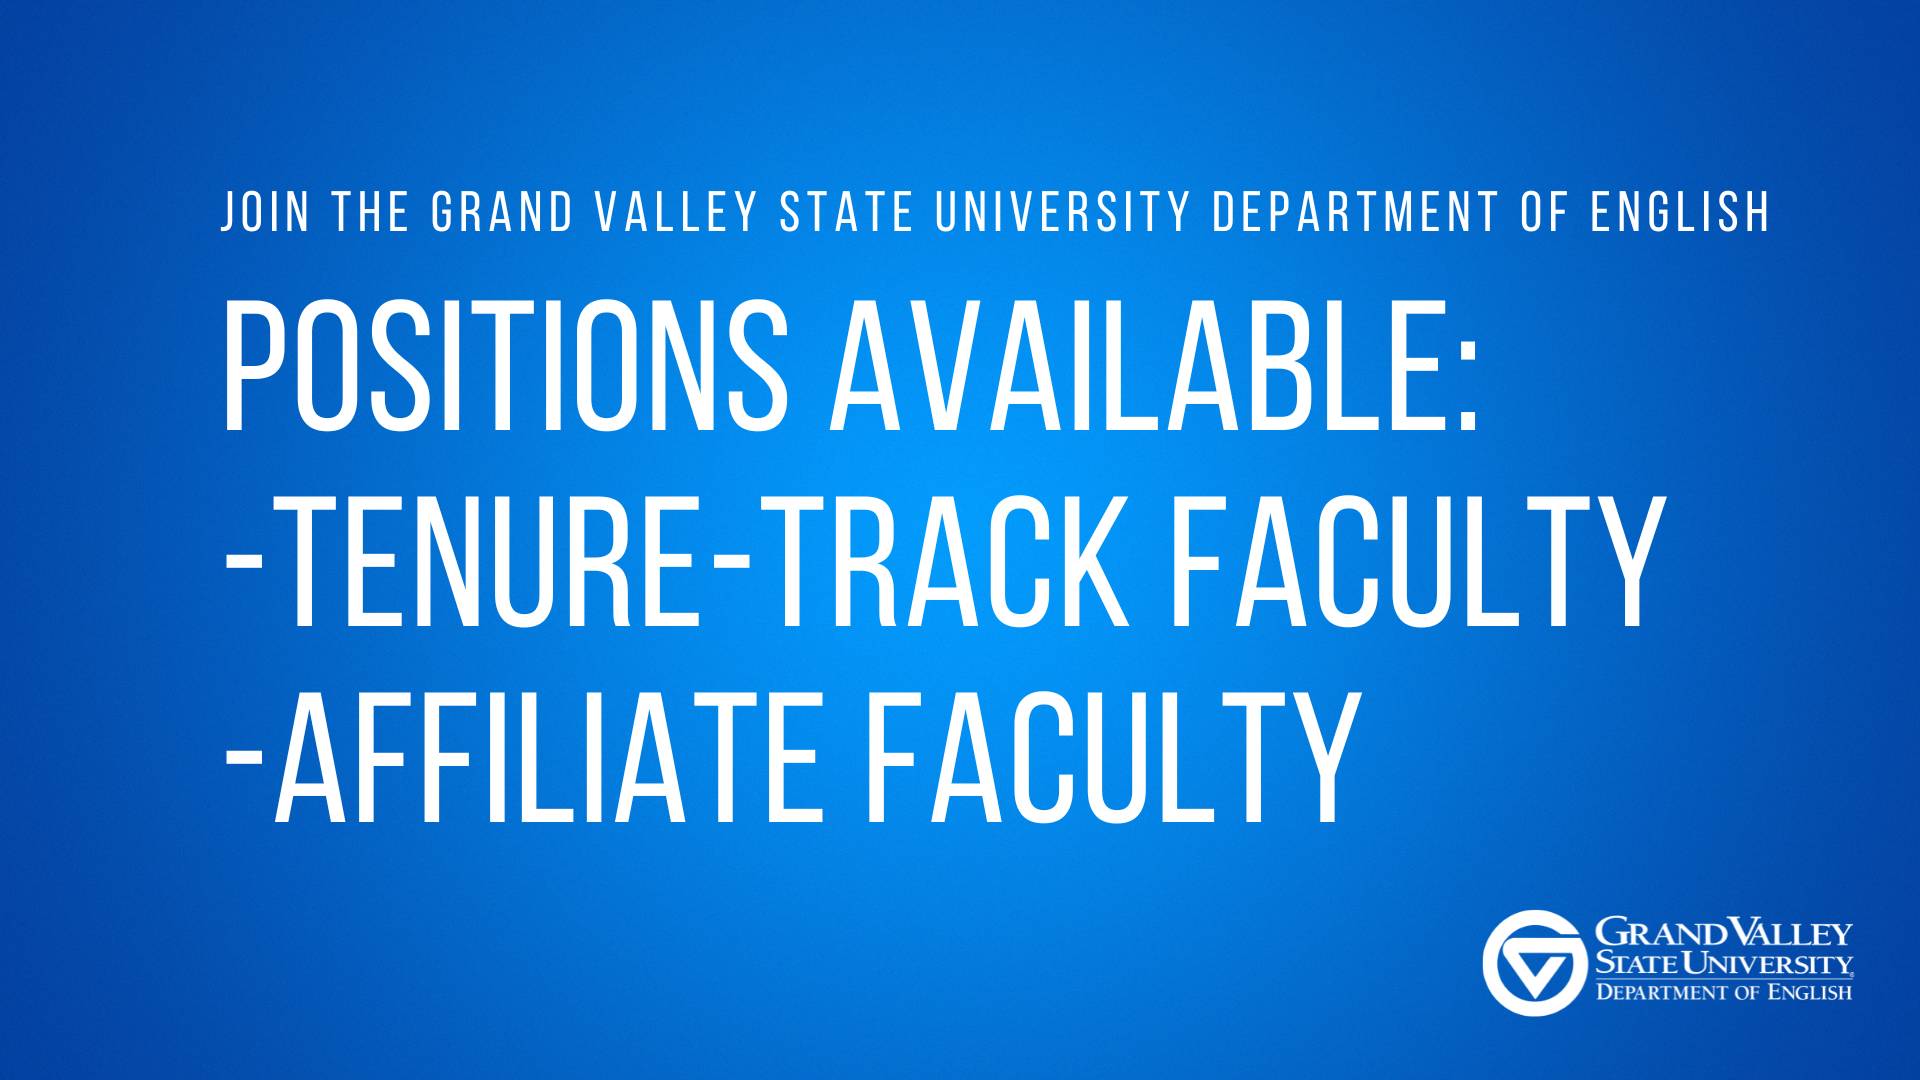 Join the Grand Valley State University Department of English - Positions Available